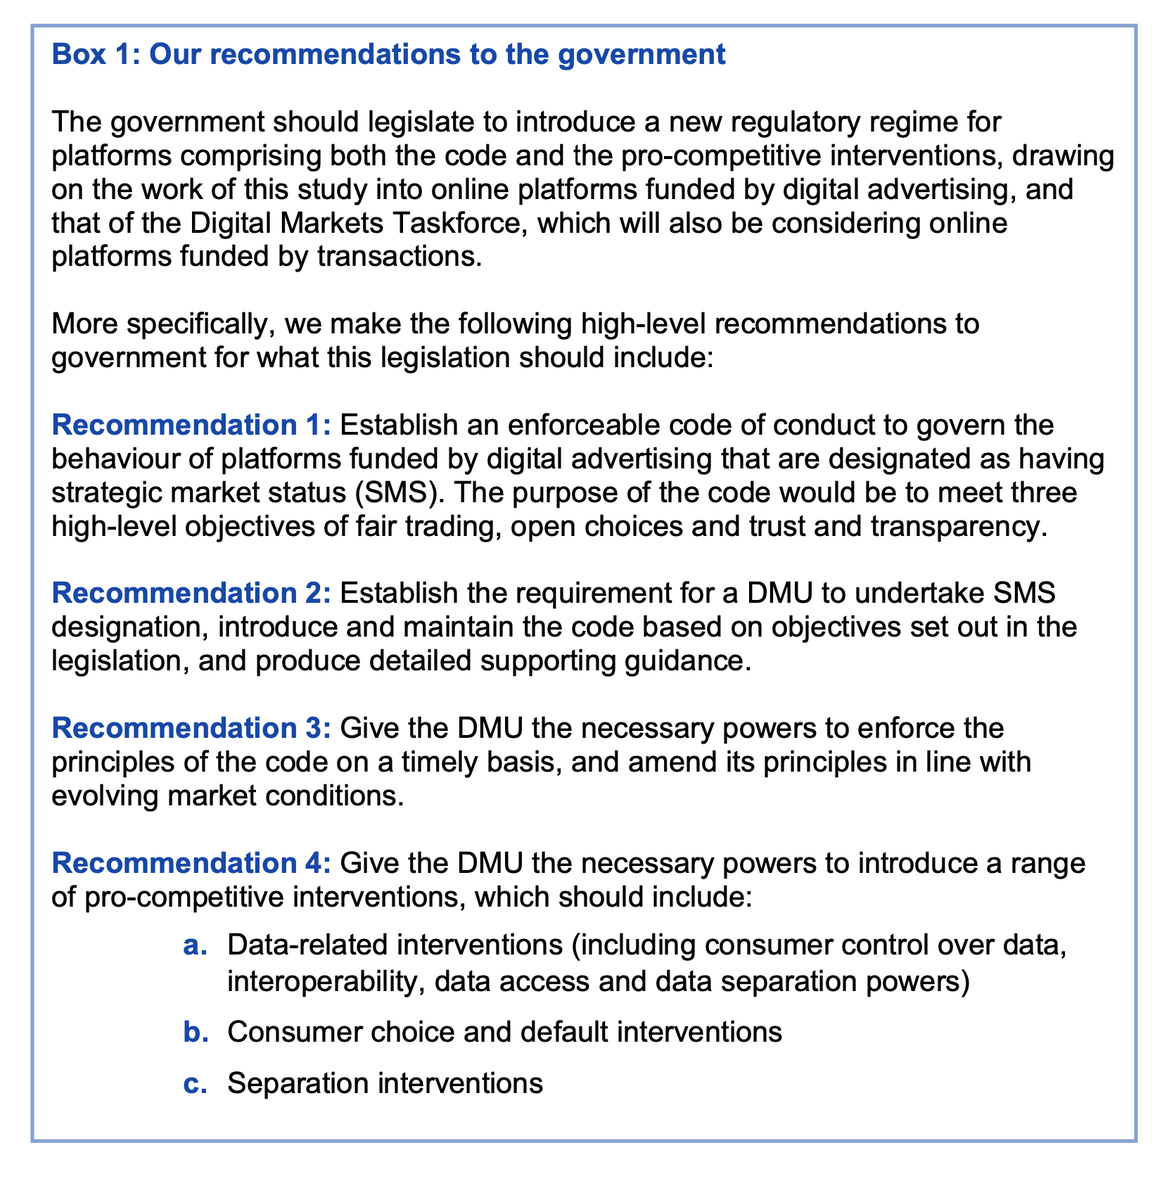 The recommendations are here. Without going into too much detail here, they would mean a regulator intervening at every level of the online digital advertising market, rewriting rules and contracts as it wanted.